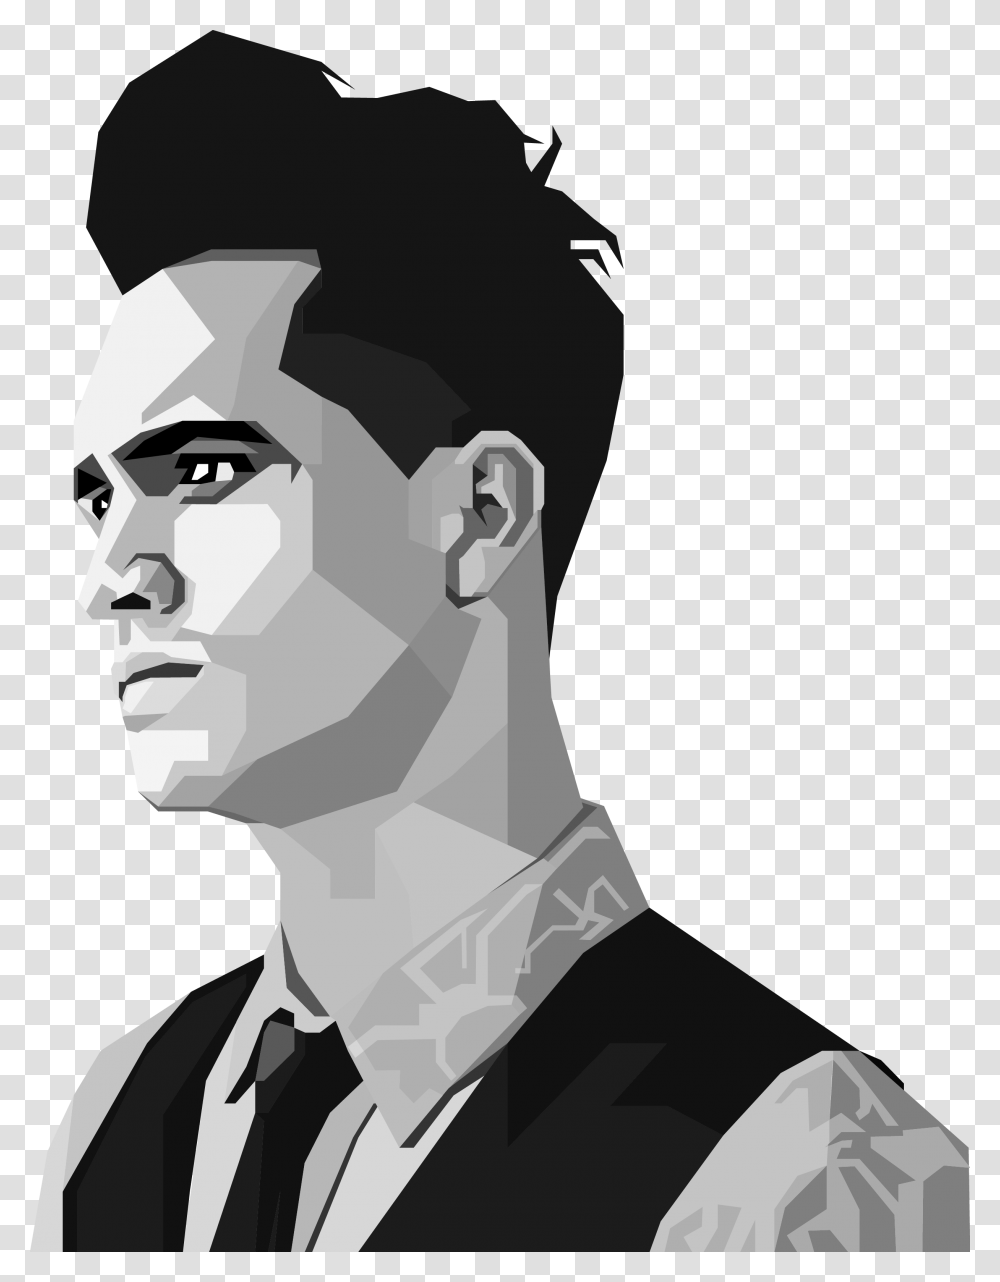 Brendon Urie Panic At The Disco Fan Art, Face, Person, Human, Head Transparent Png